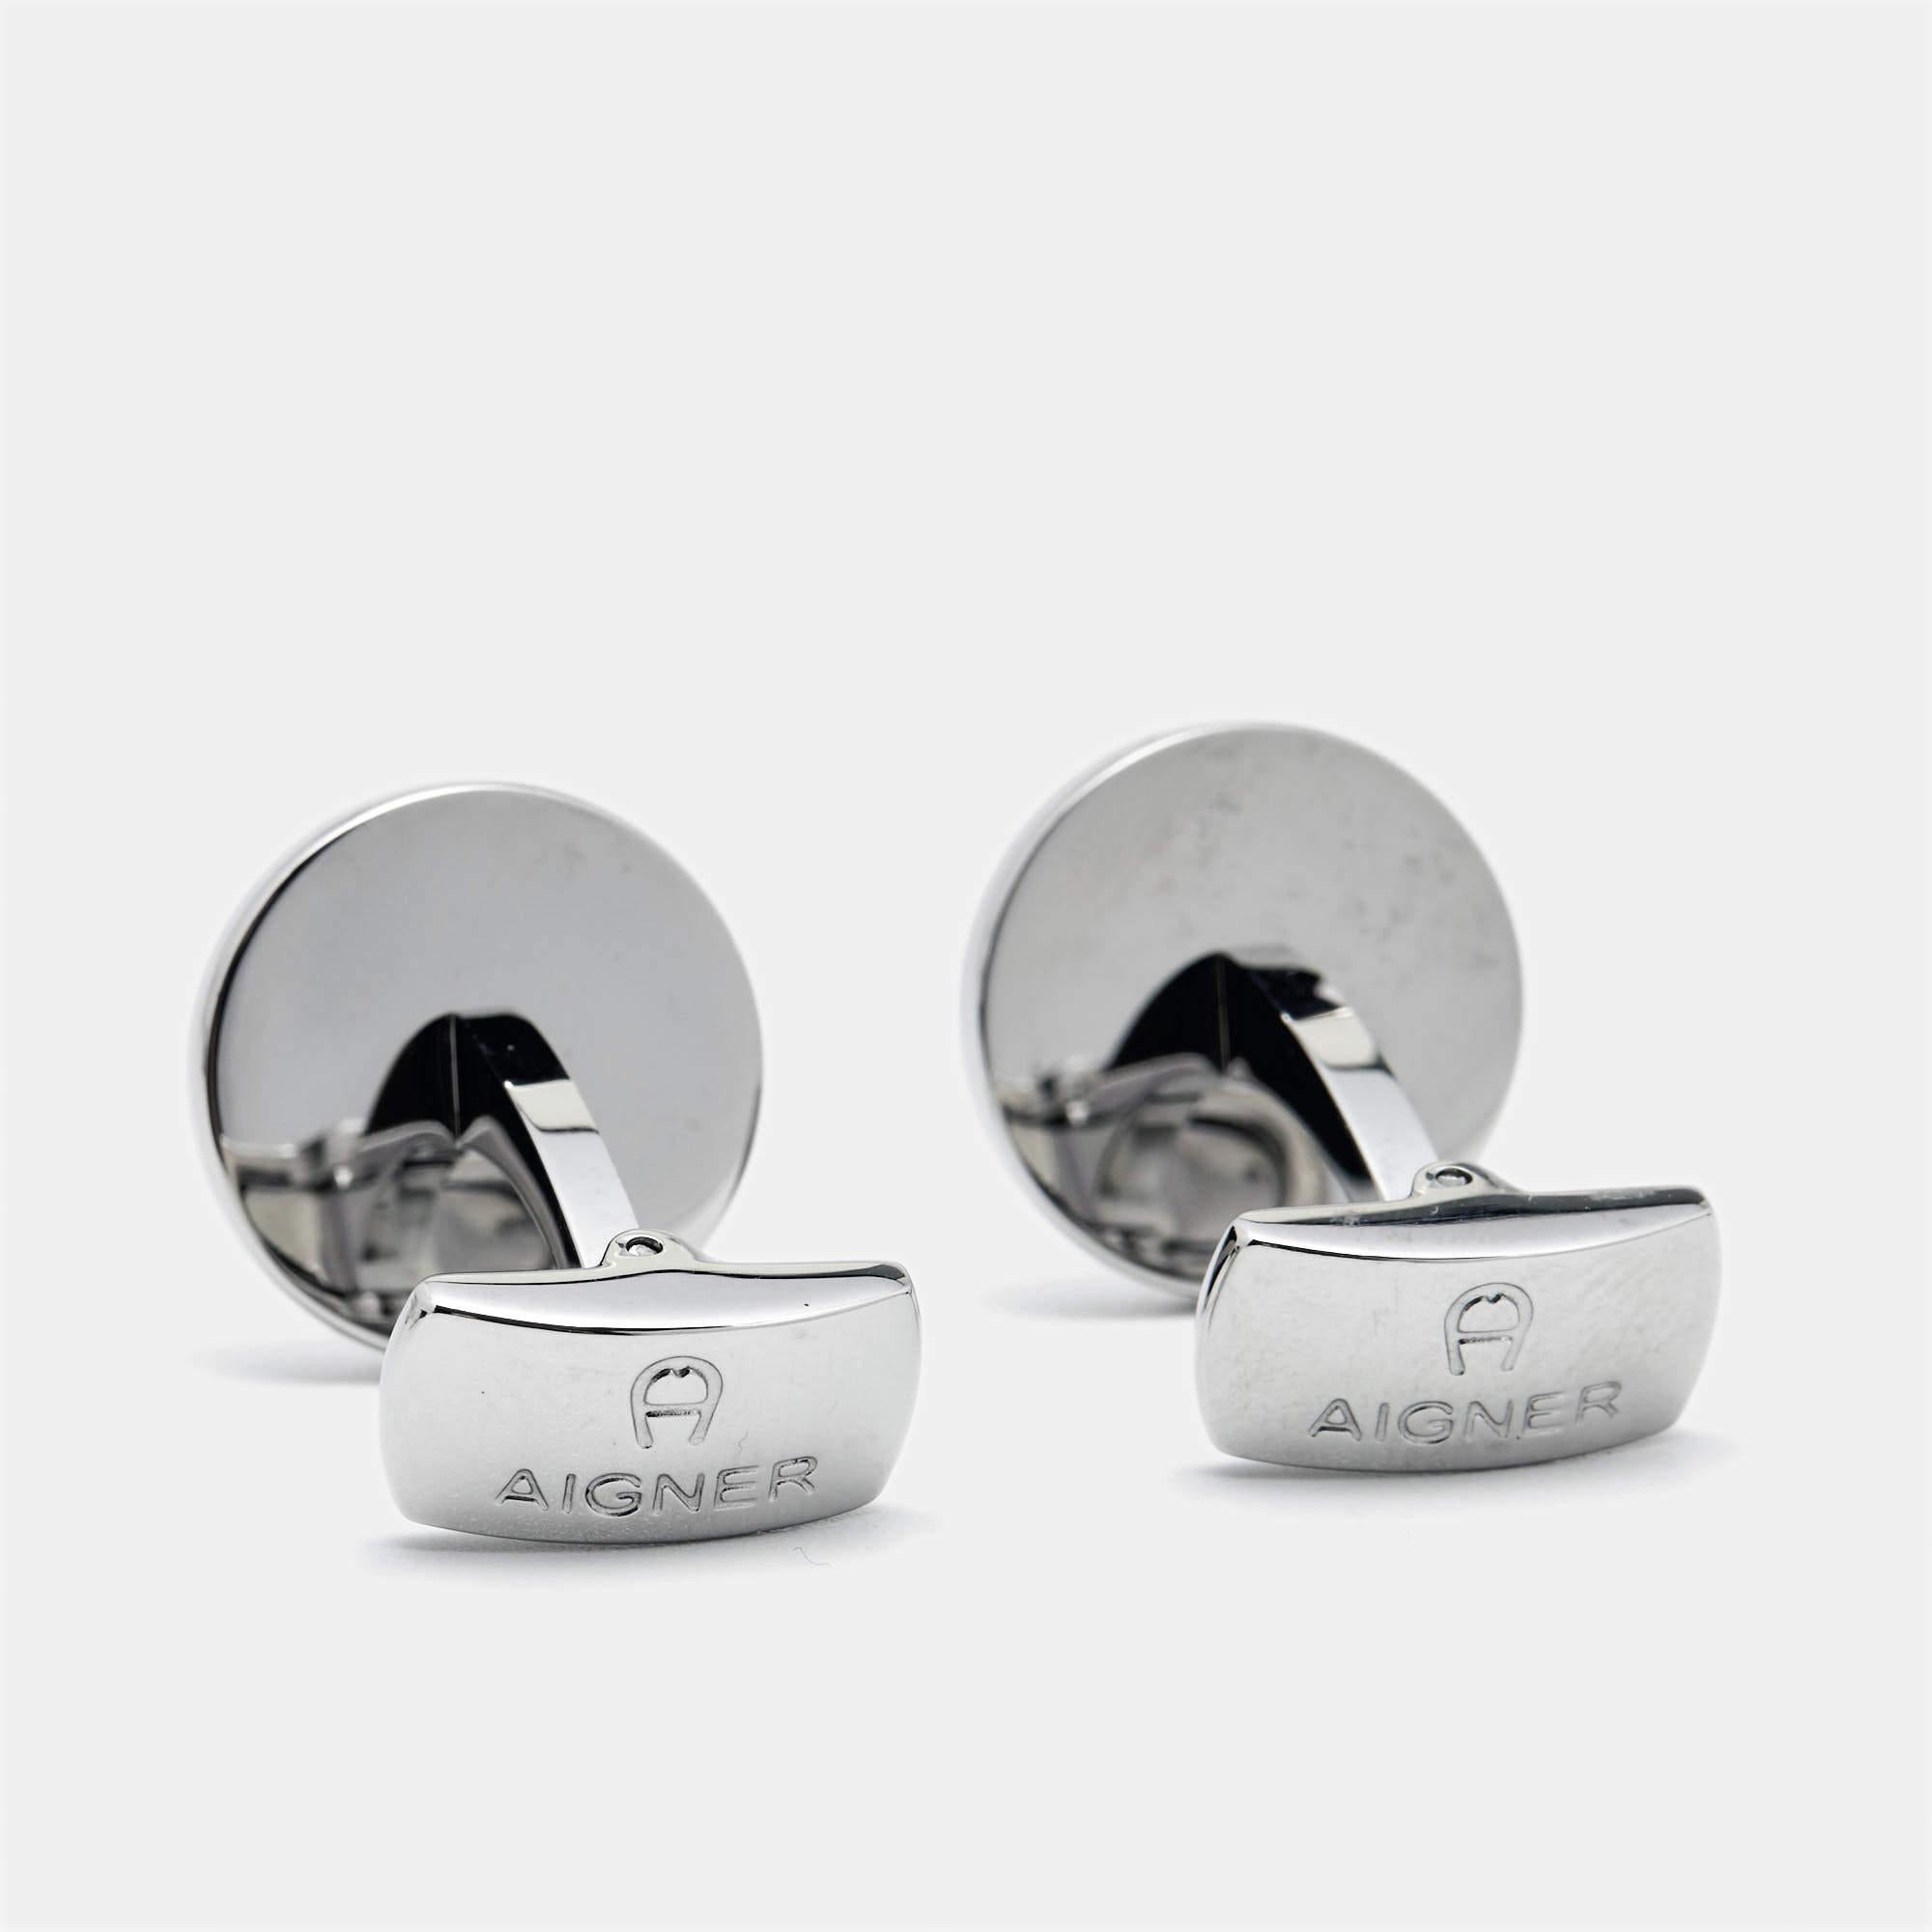 Perfect accessory for men, cufflinks add a touch of elegant appeal to formal ensembles. This one from Aigner will be your favorite.

Includes: Original Box

